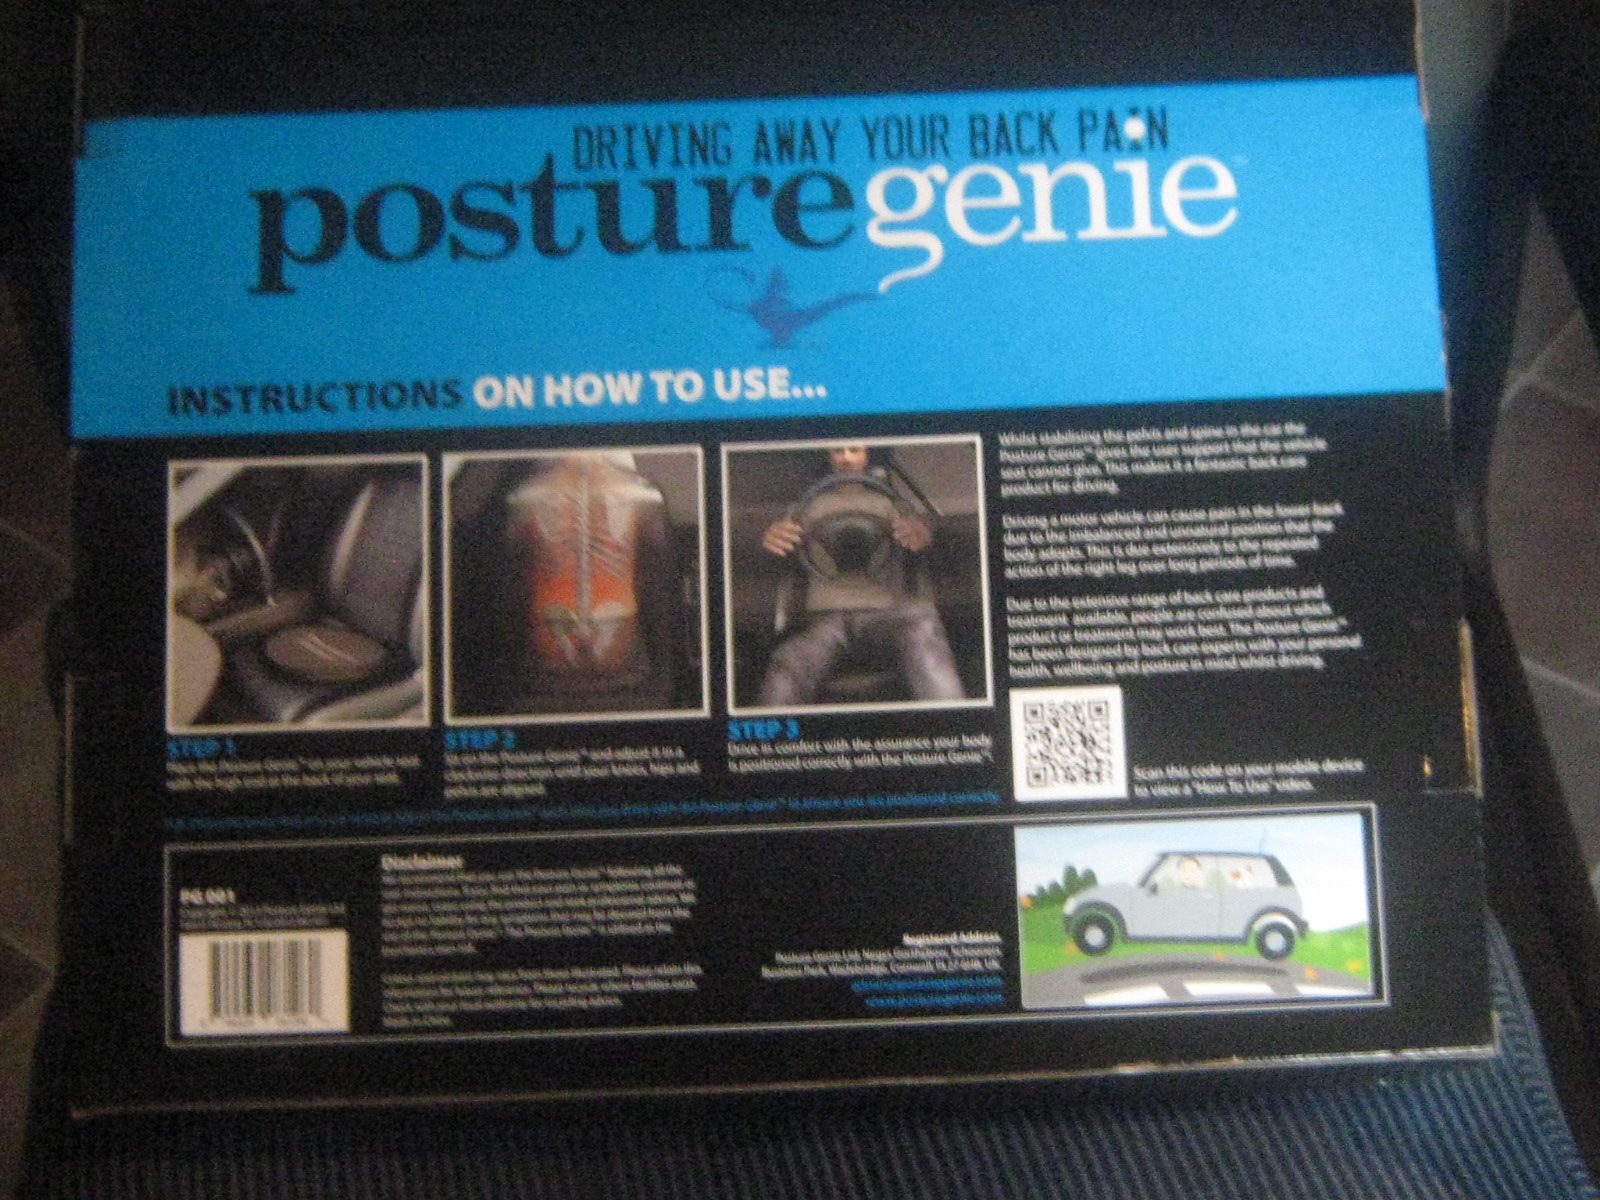 Posture Genie Absolutely New